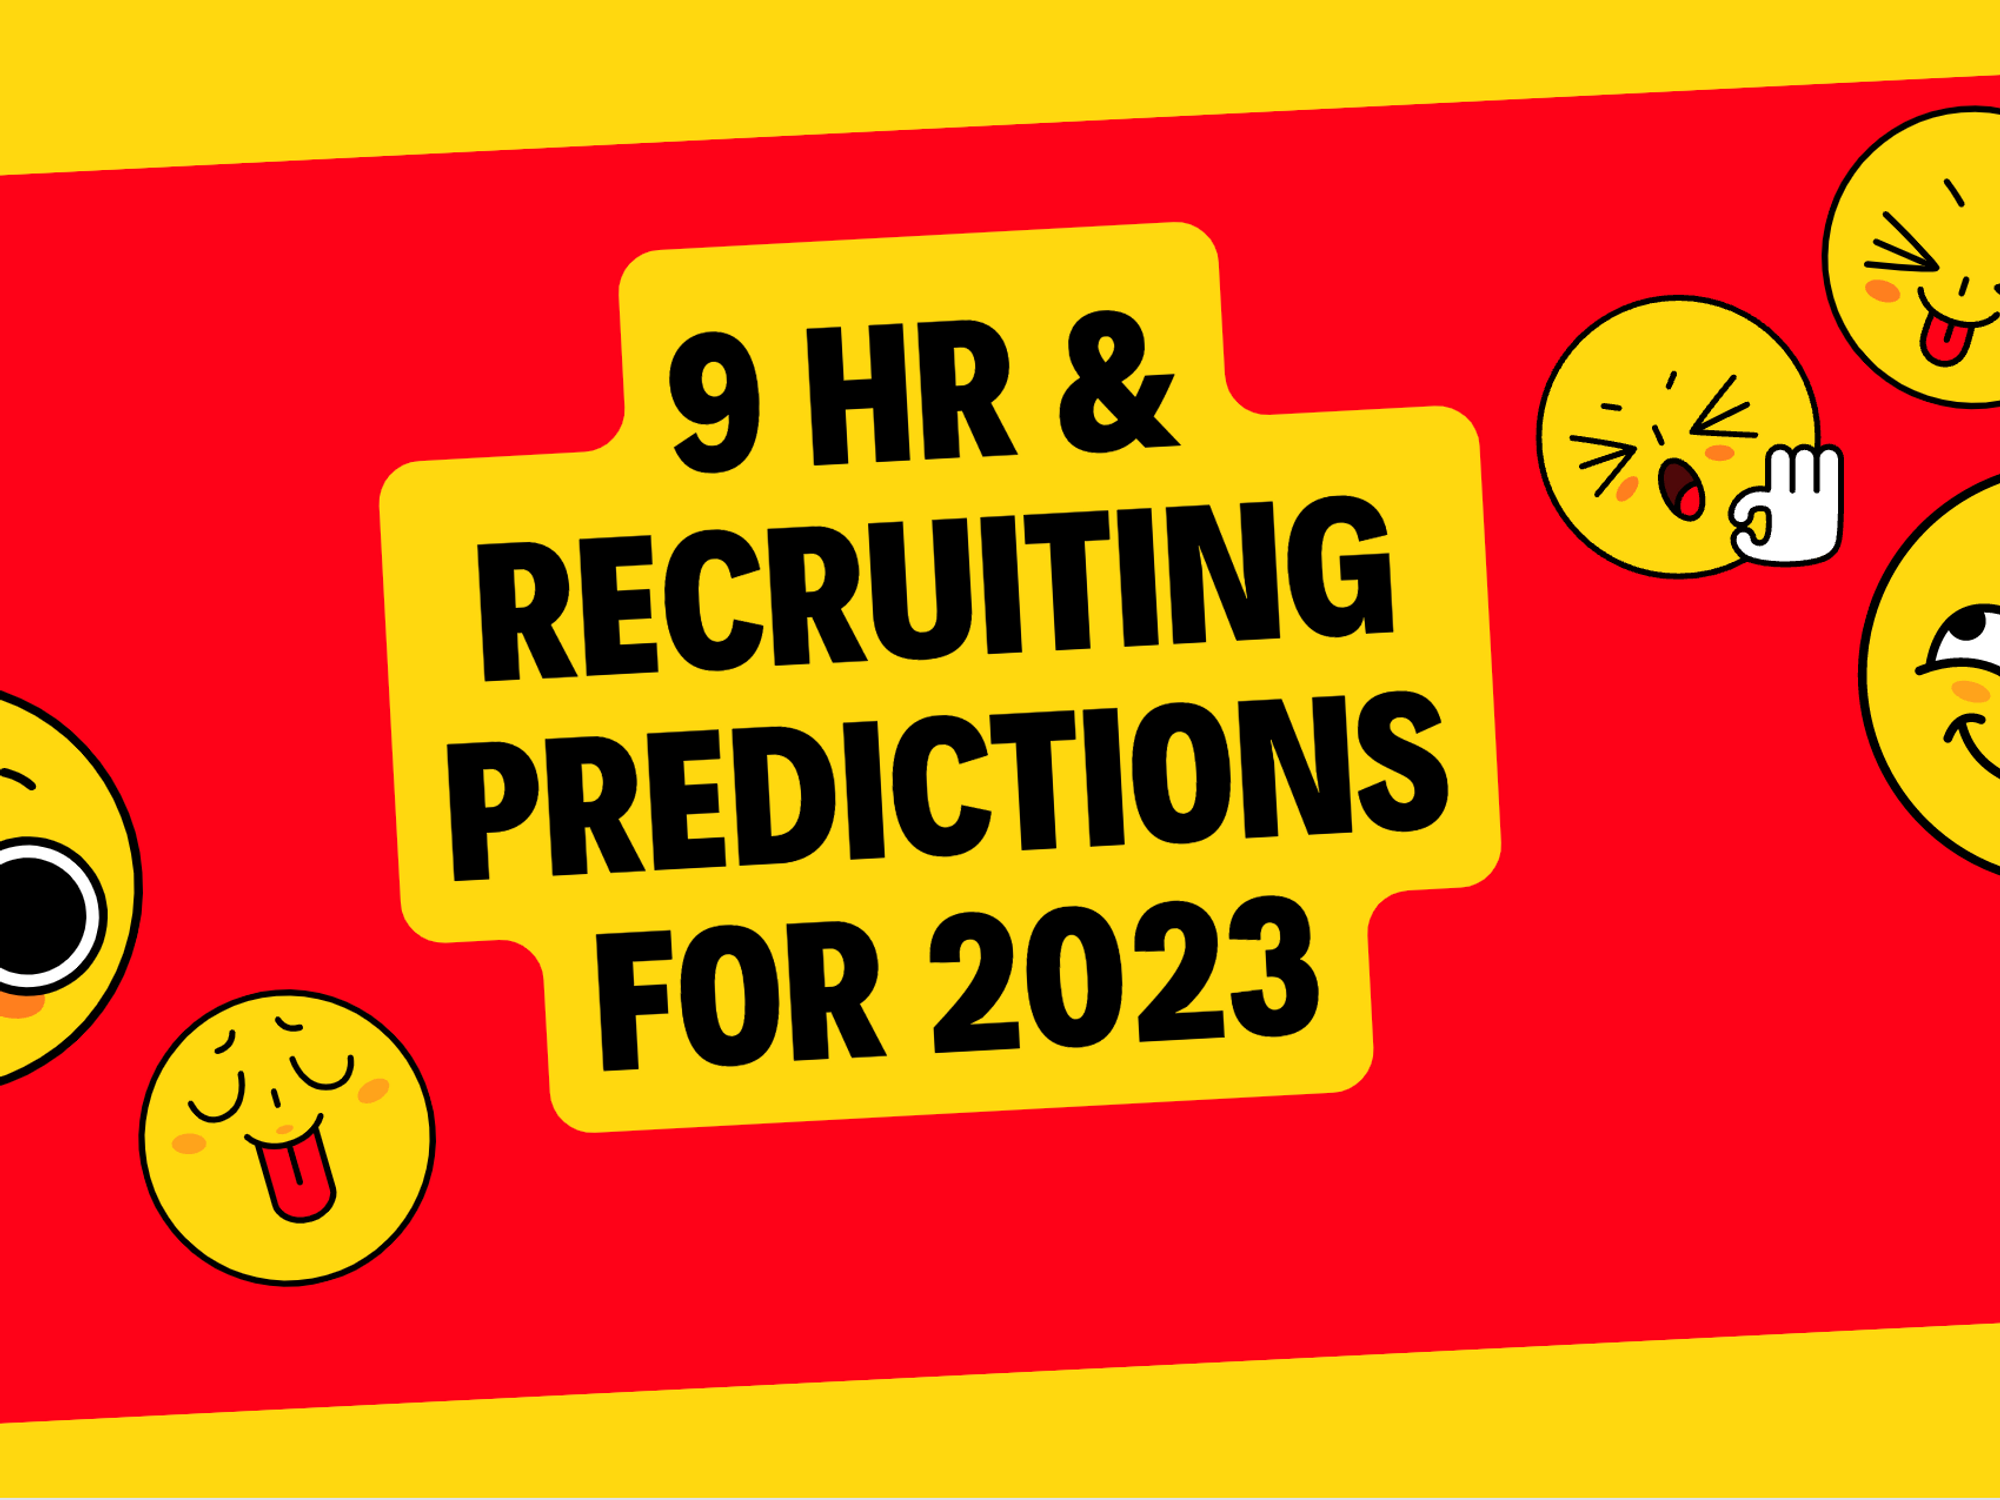 9 HR & Recruiting Predictions For 2023